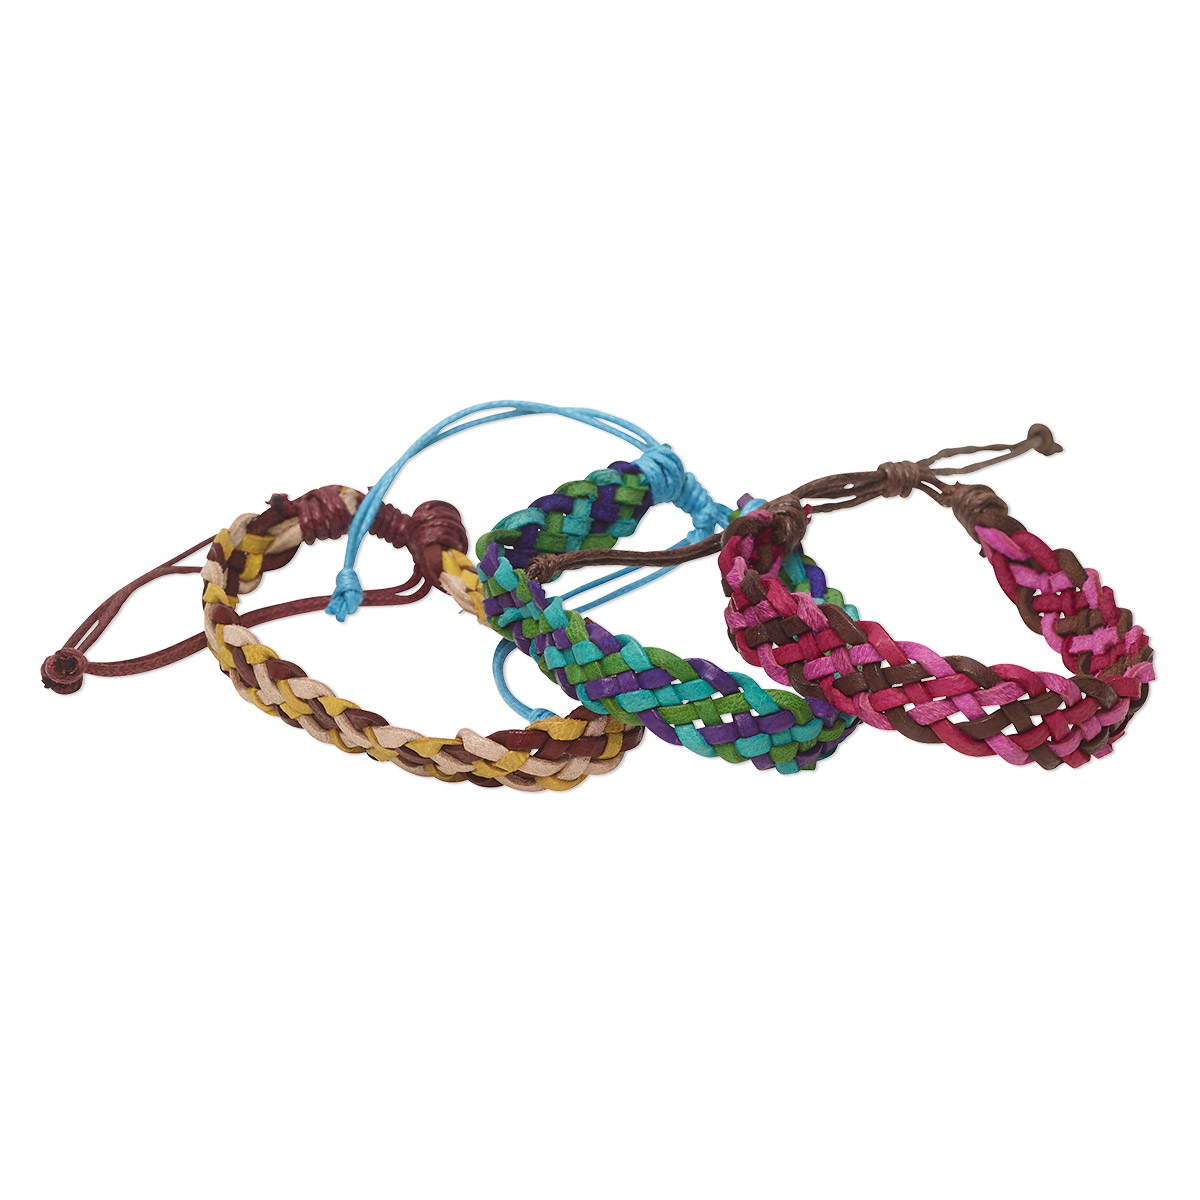 Bracelet, leather, multicolored, 12.5mm wide, woven, adjustable from 7 ...